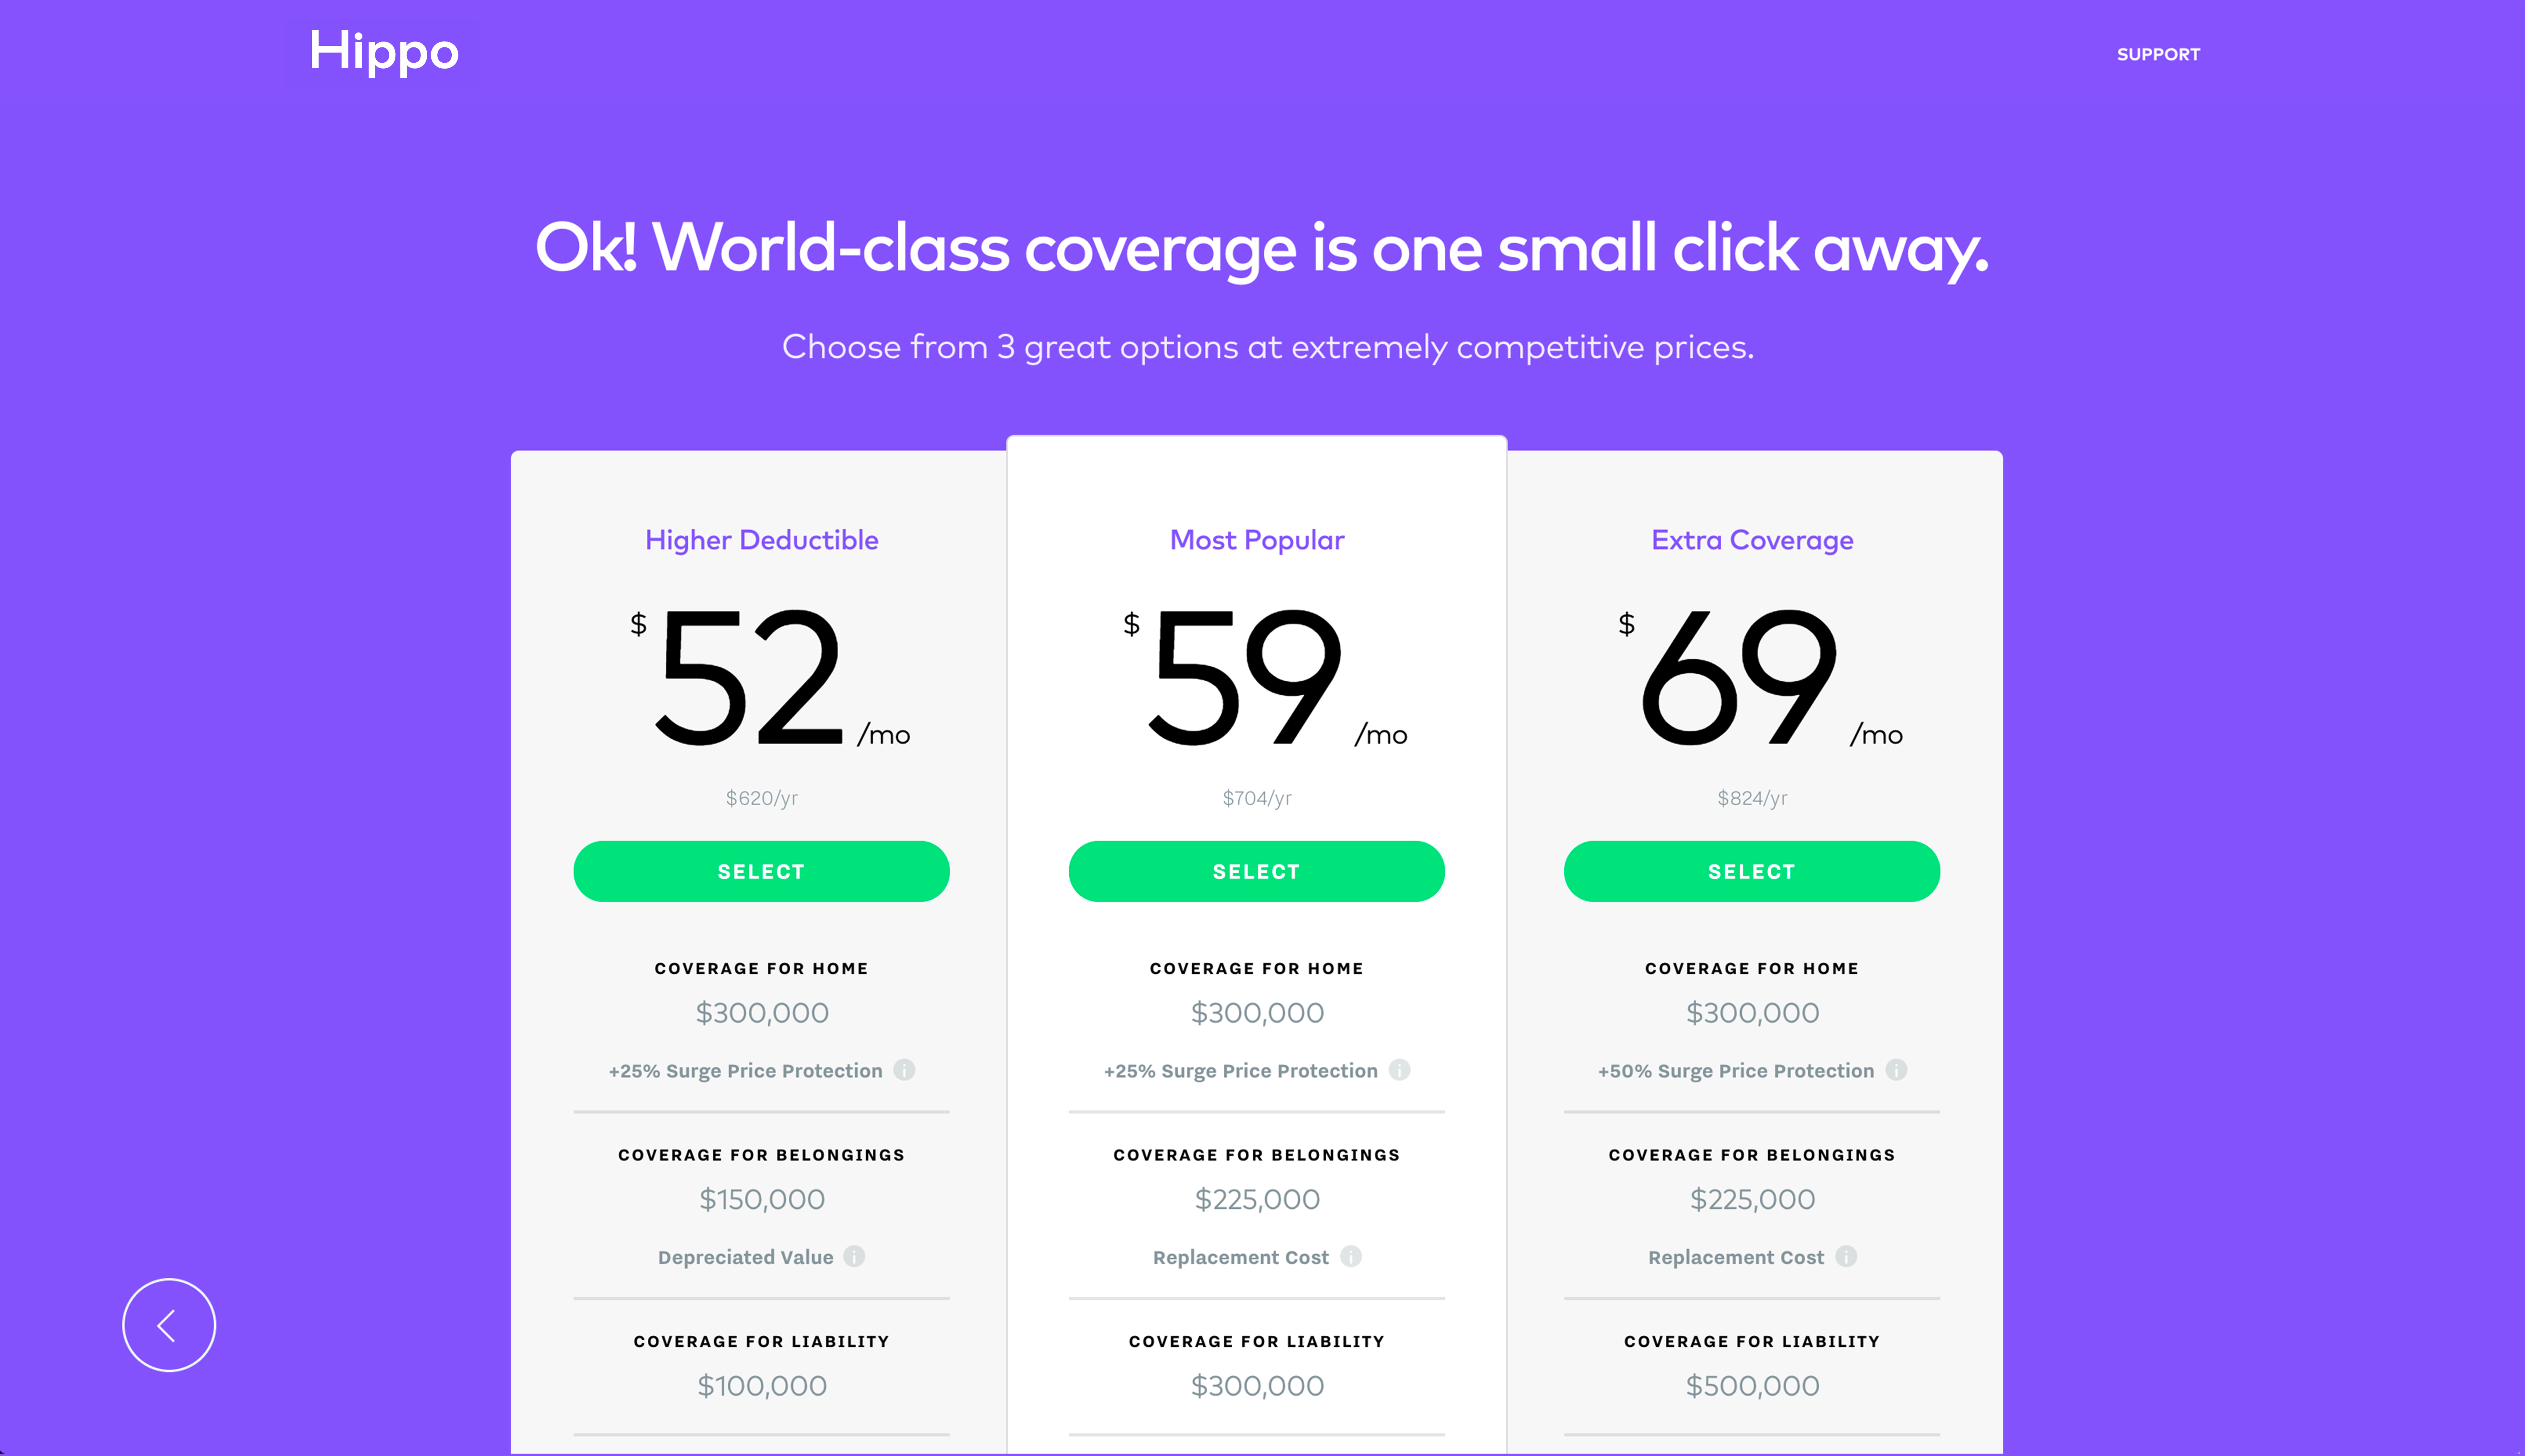 Hippo Launches with Promise of 60Second Homeowners Insurance Quote